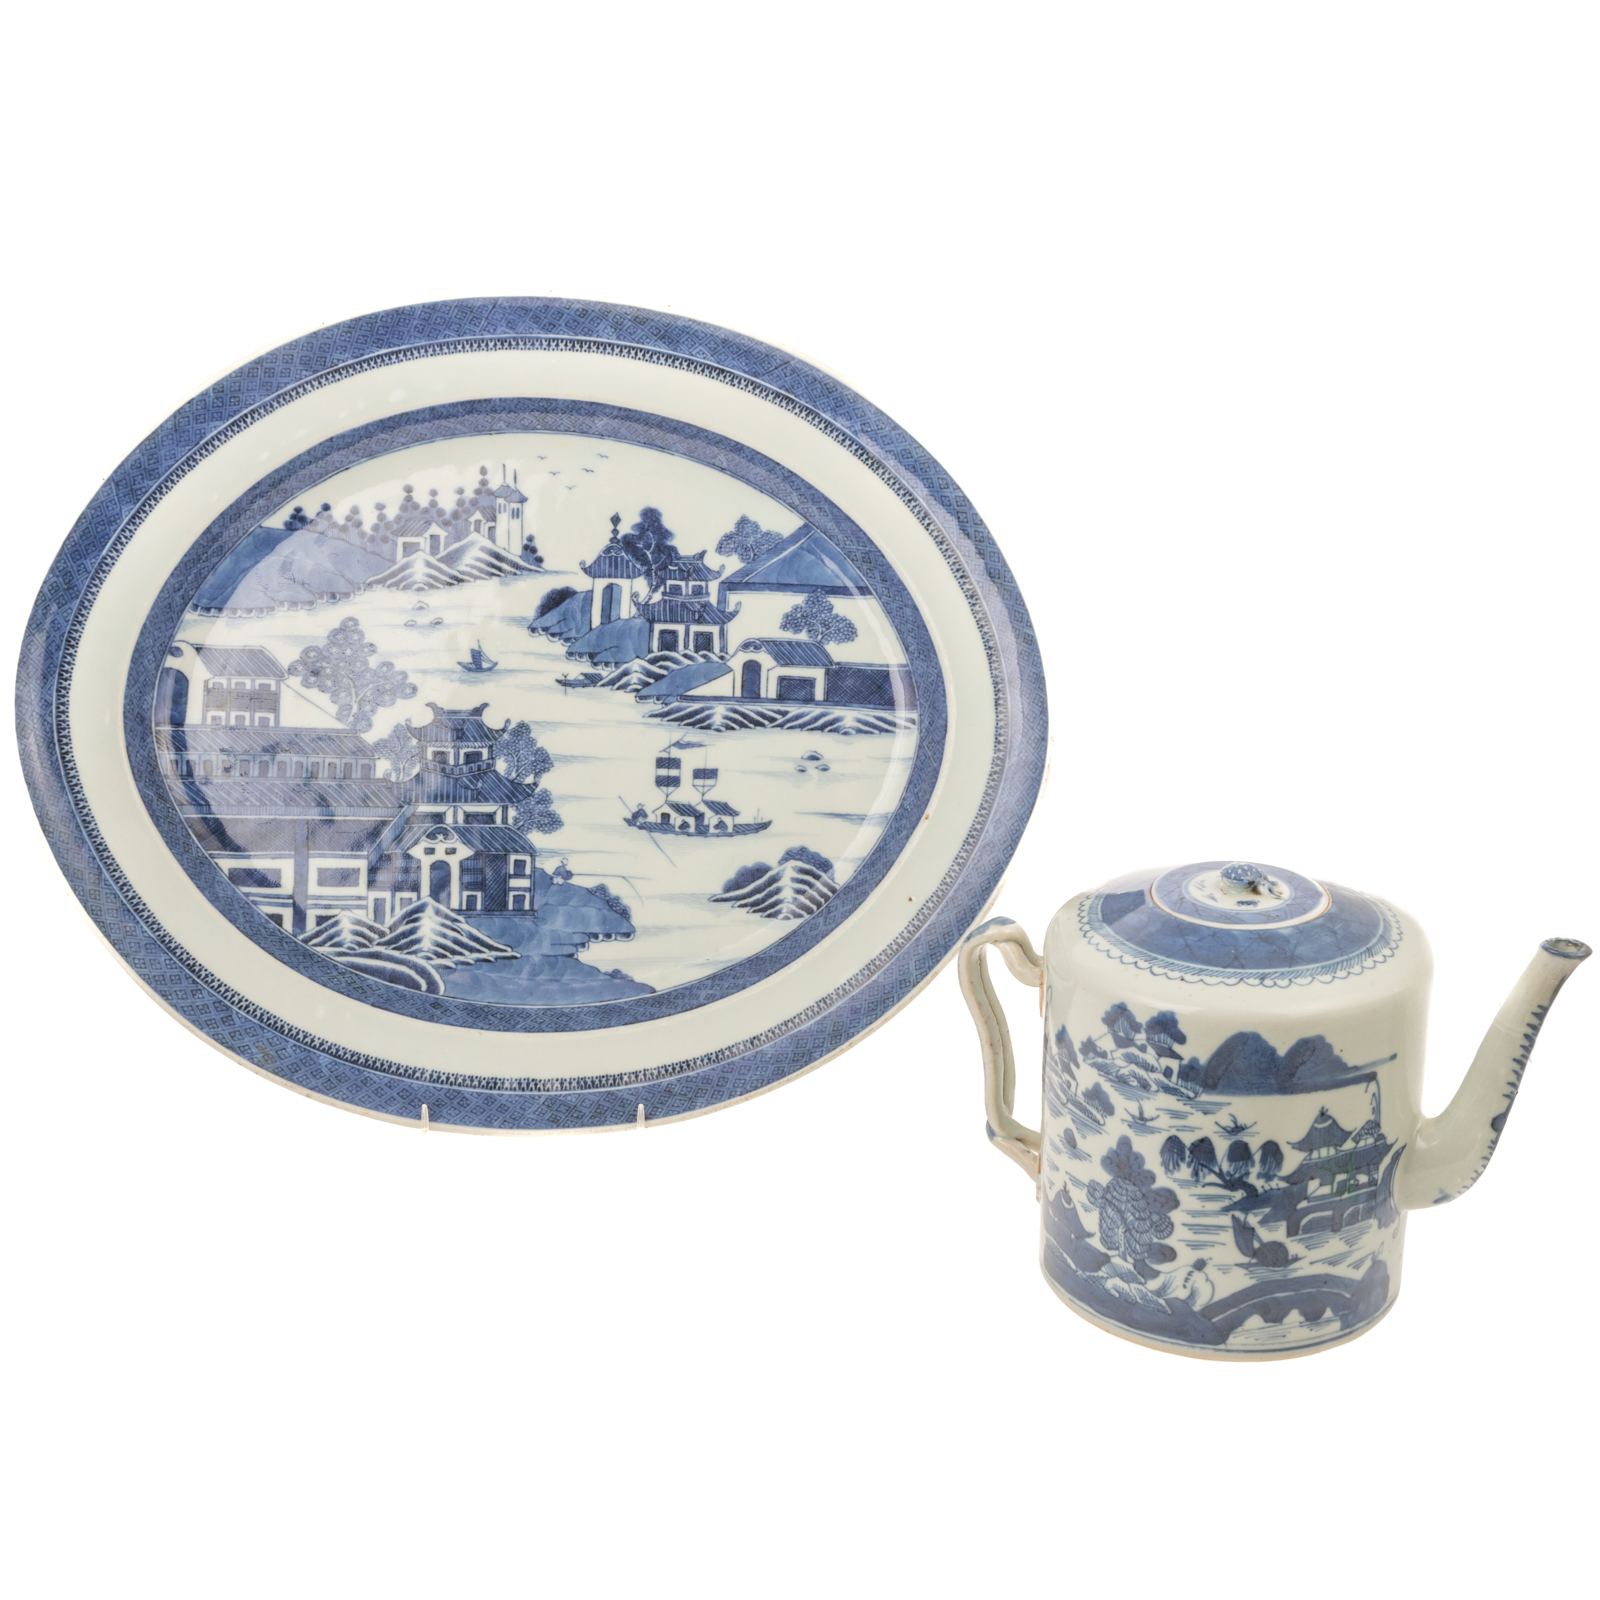 CHINESE EXPORT BLUE WHITE PLATTER 2e9a1a